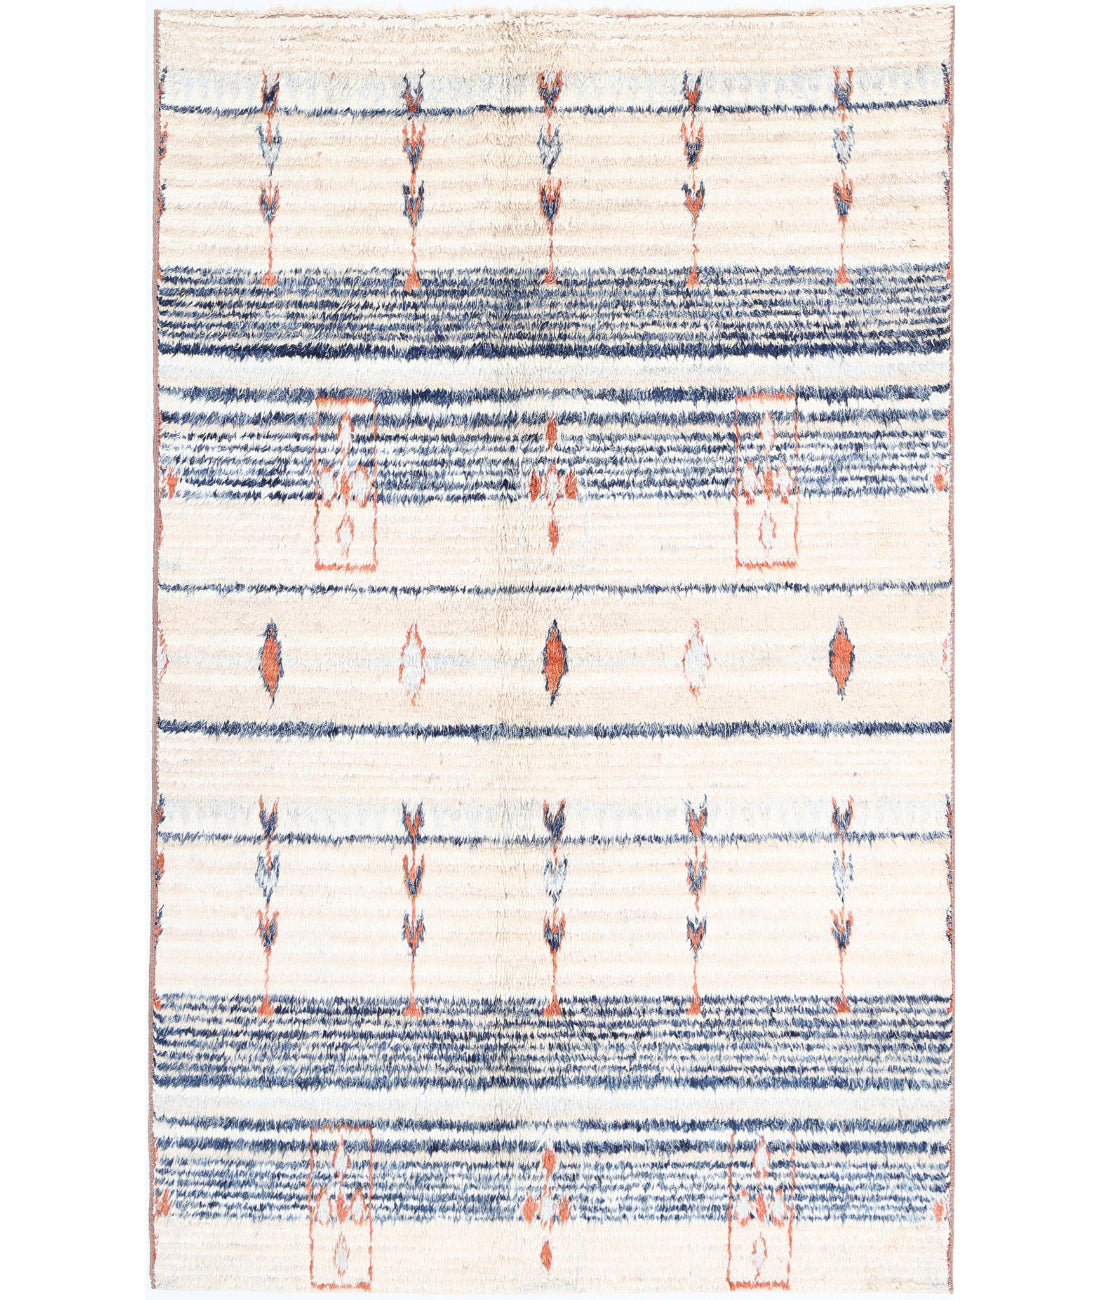 Hand Knotted Tribal Moroccan Wool Rug - 4'11'' x 8'4'' 4'11'' x 8'4'' (148 X 250) / Multi / Multi